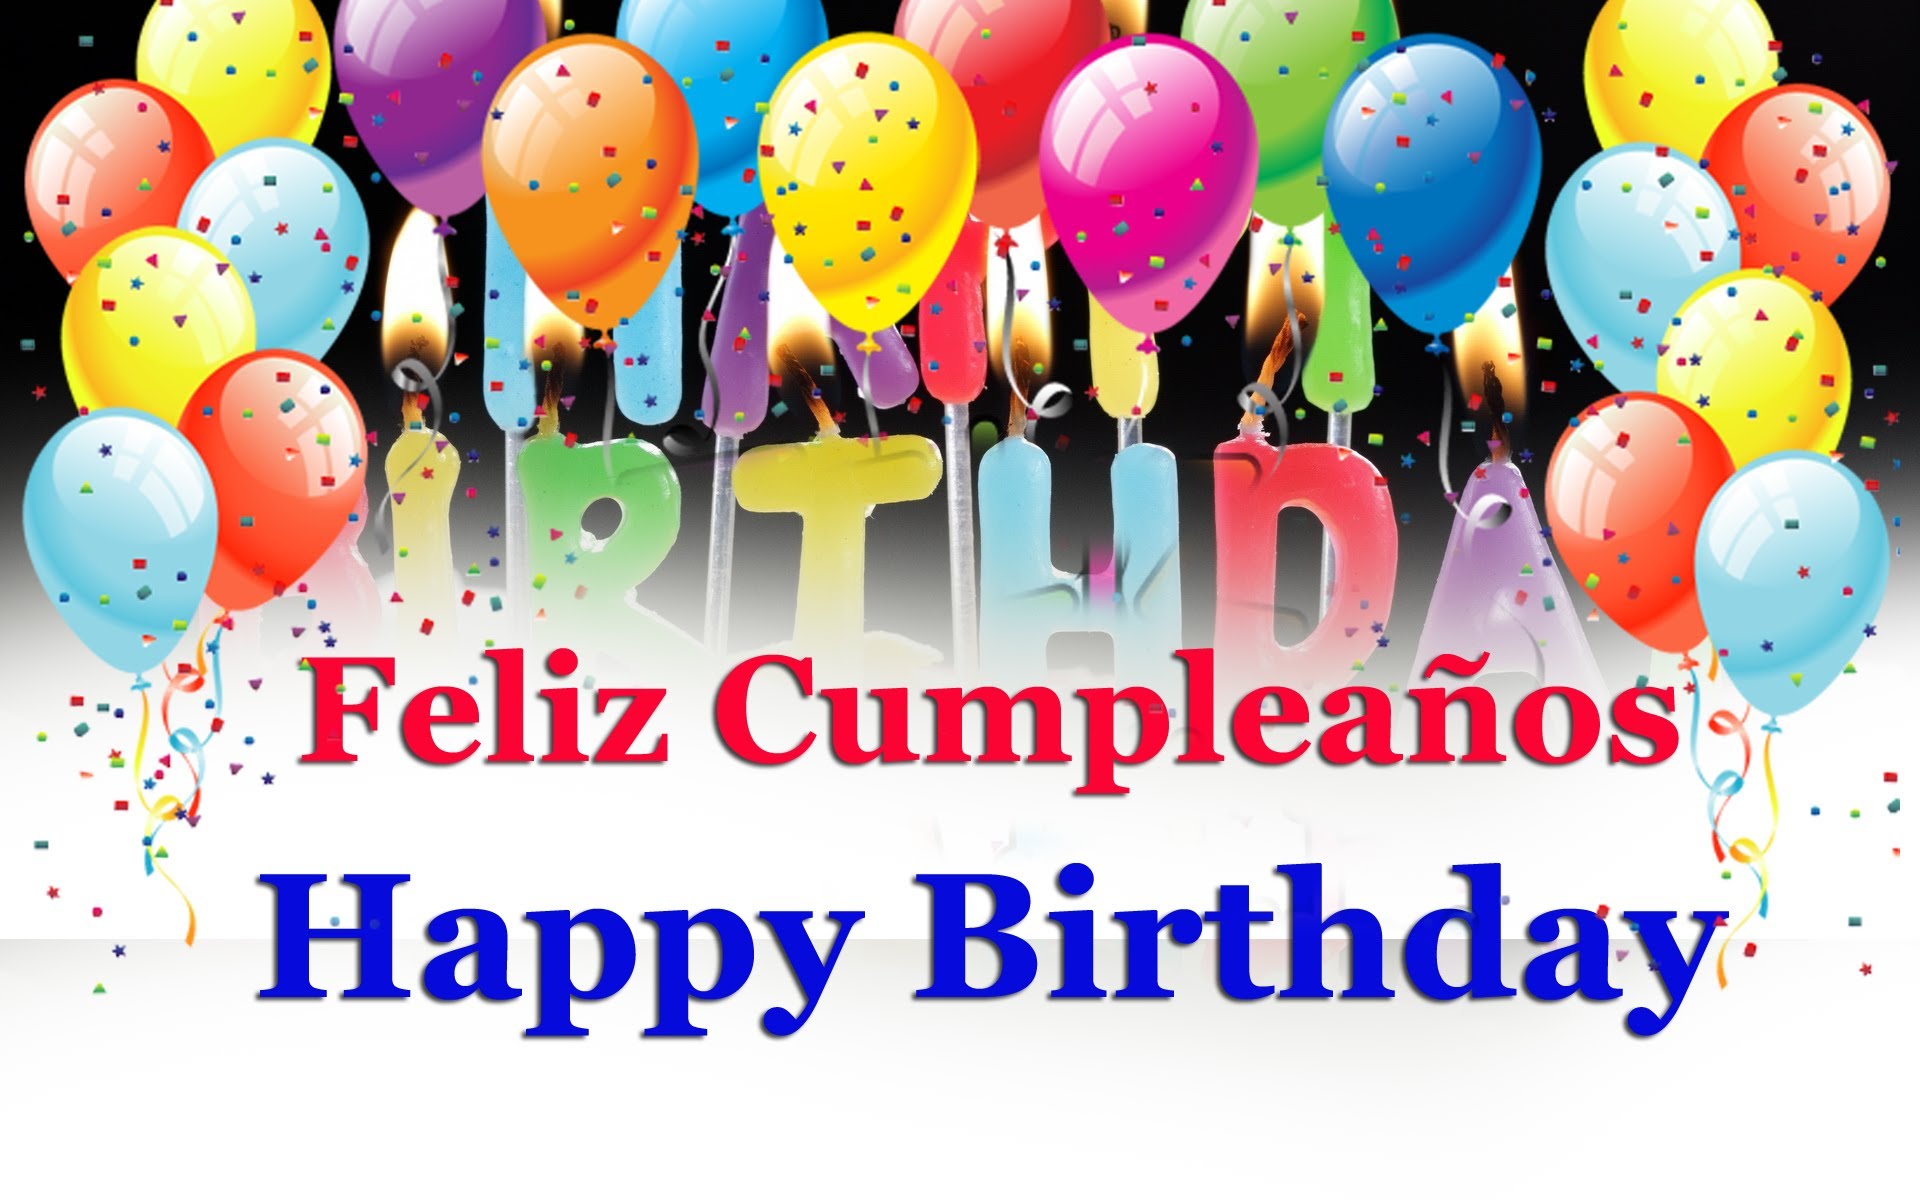 Download Happy Birthday Wishes And Quotes In Spanish And English Spanish To English Translation